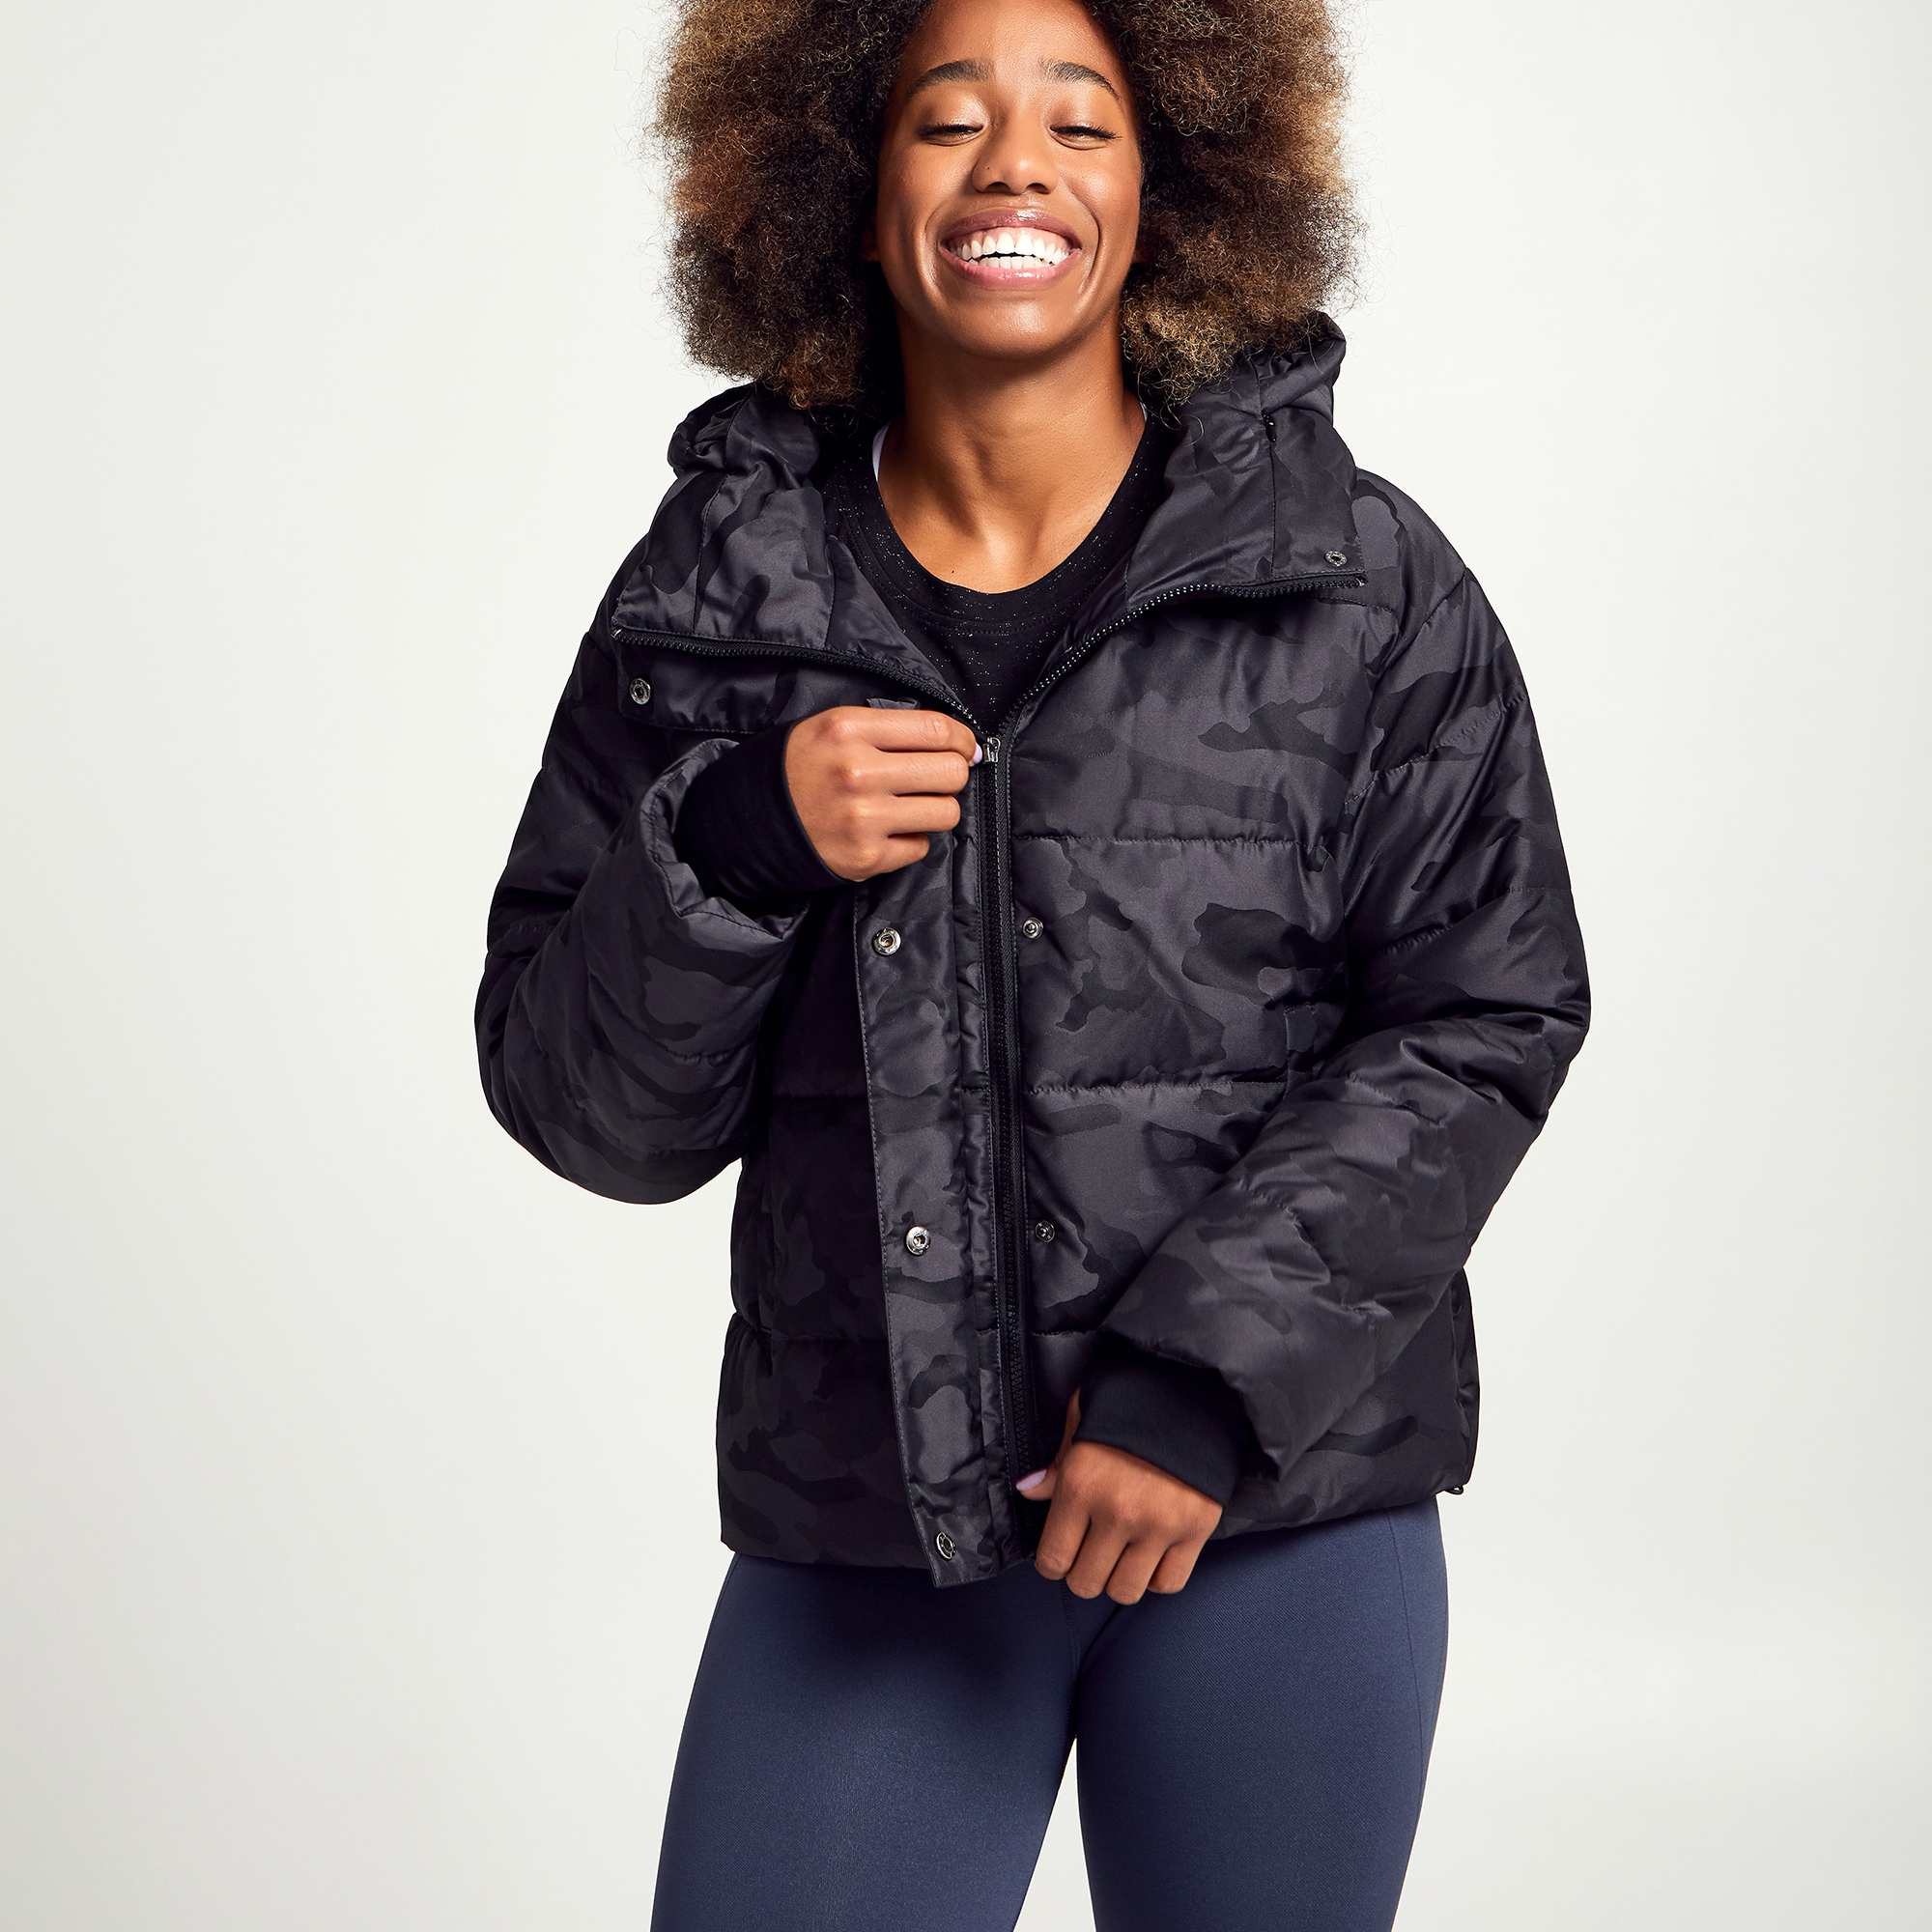 Soul by SoulCycle Camo Puffer Jacket - SoulCycle Shop